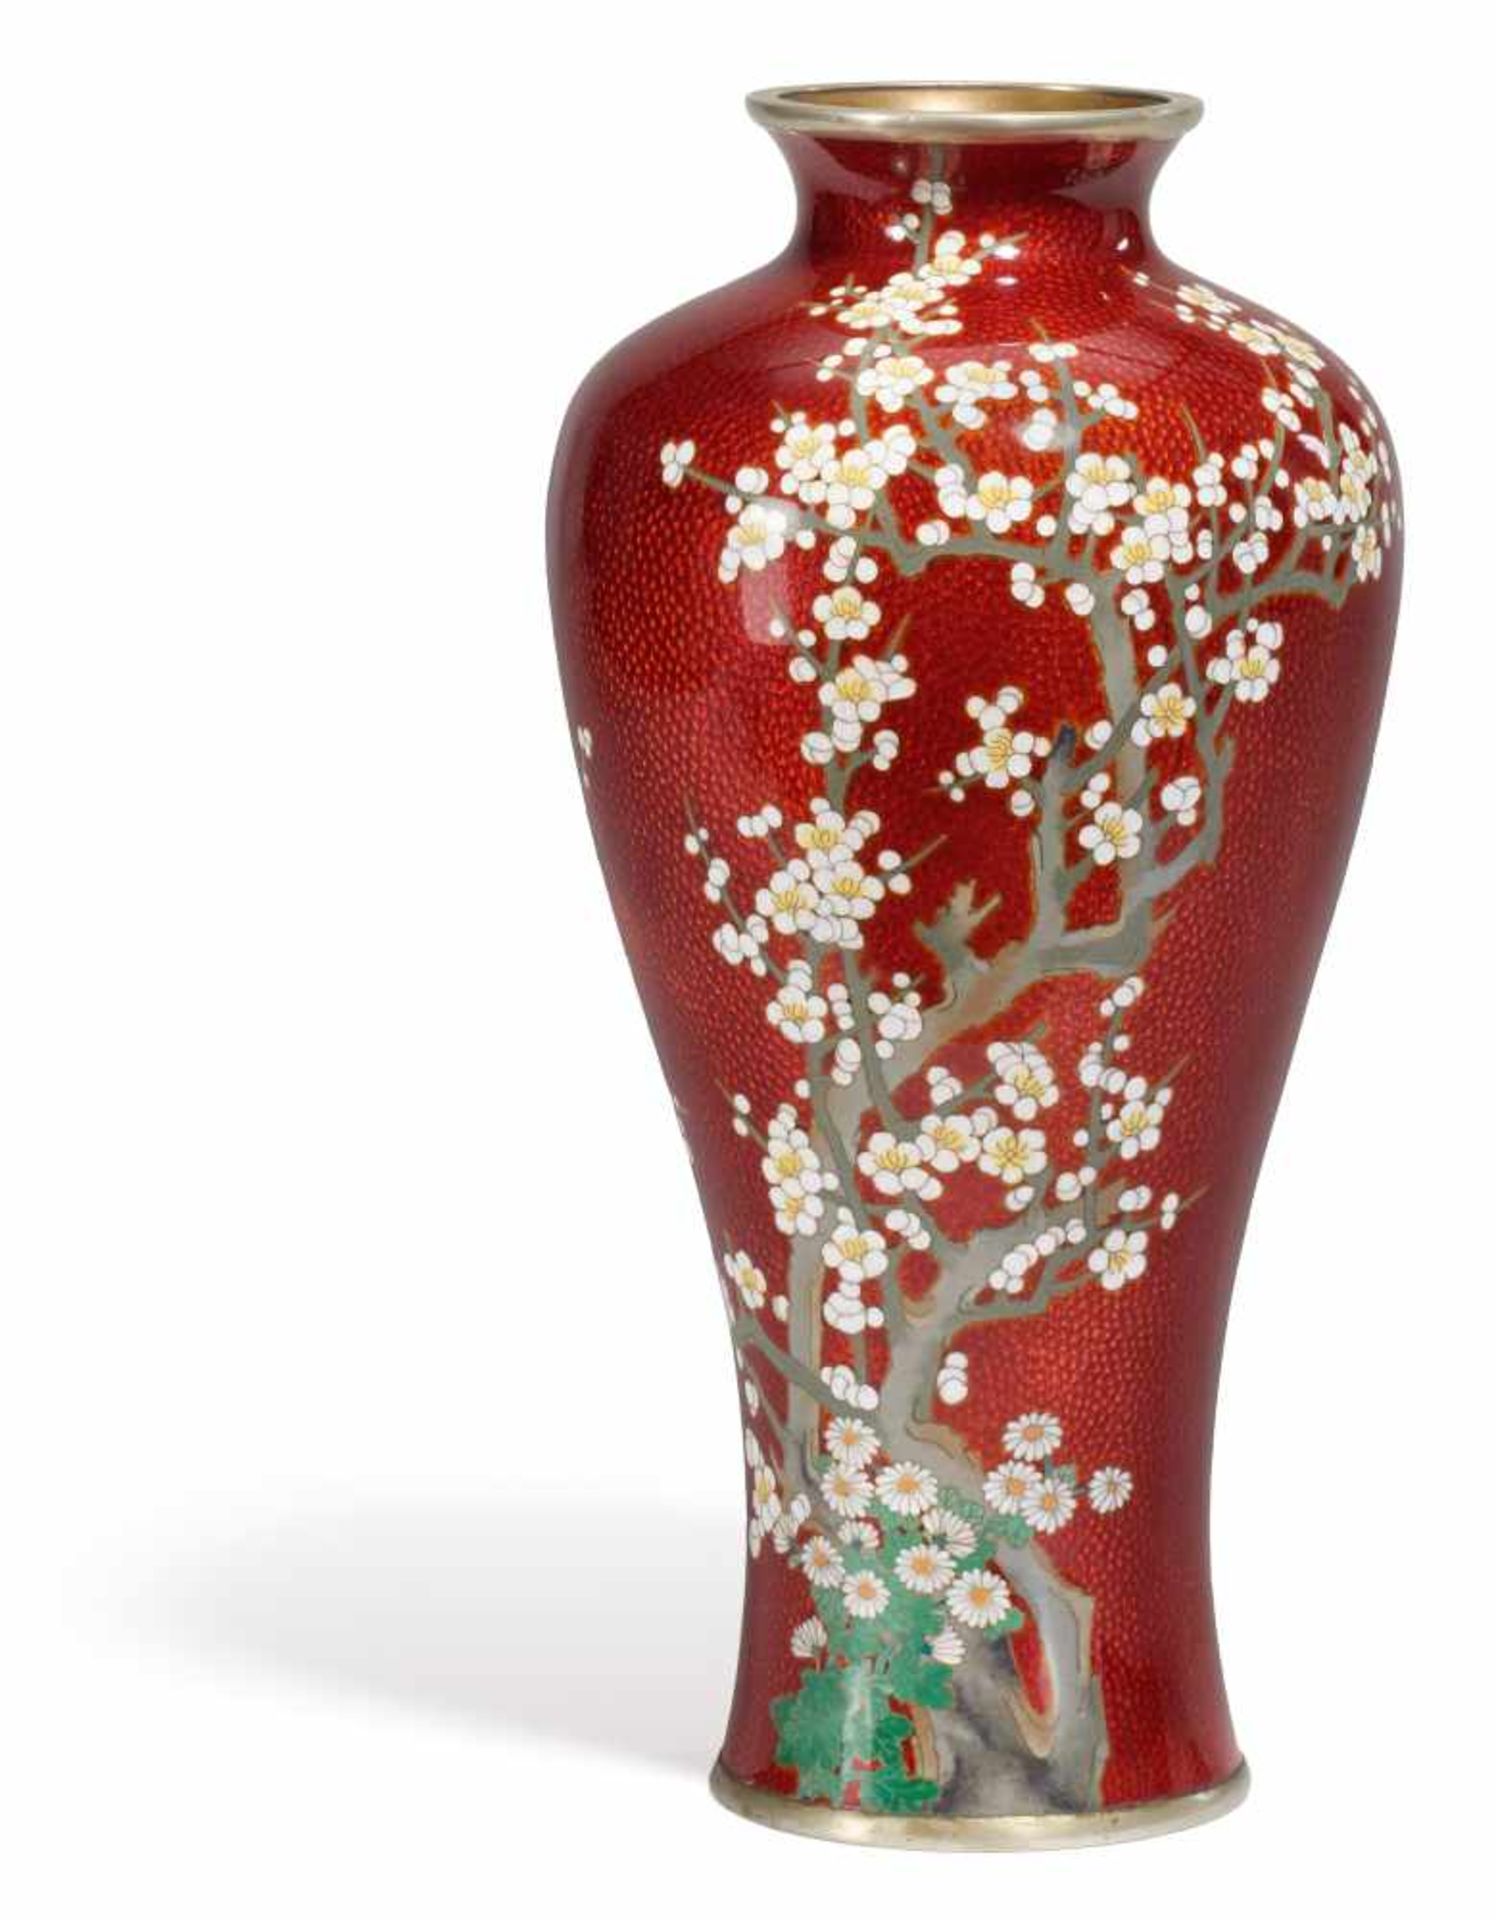 RARE PIGEON BLOOD RED VASE WITH BLOOMING PLUMS. Japan. Meiji period (1868-1912). Cloisonné on